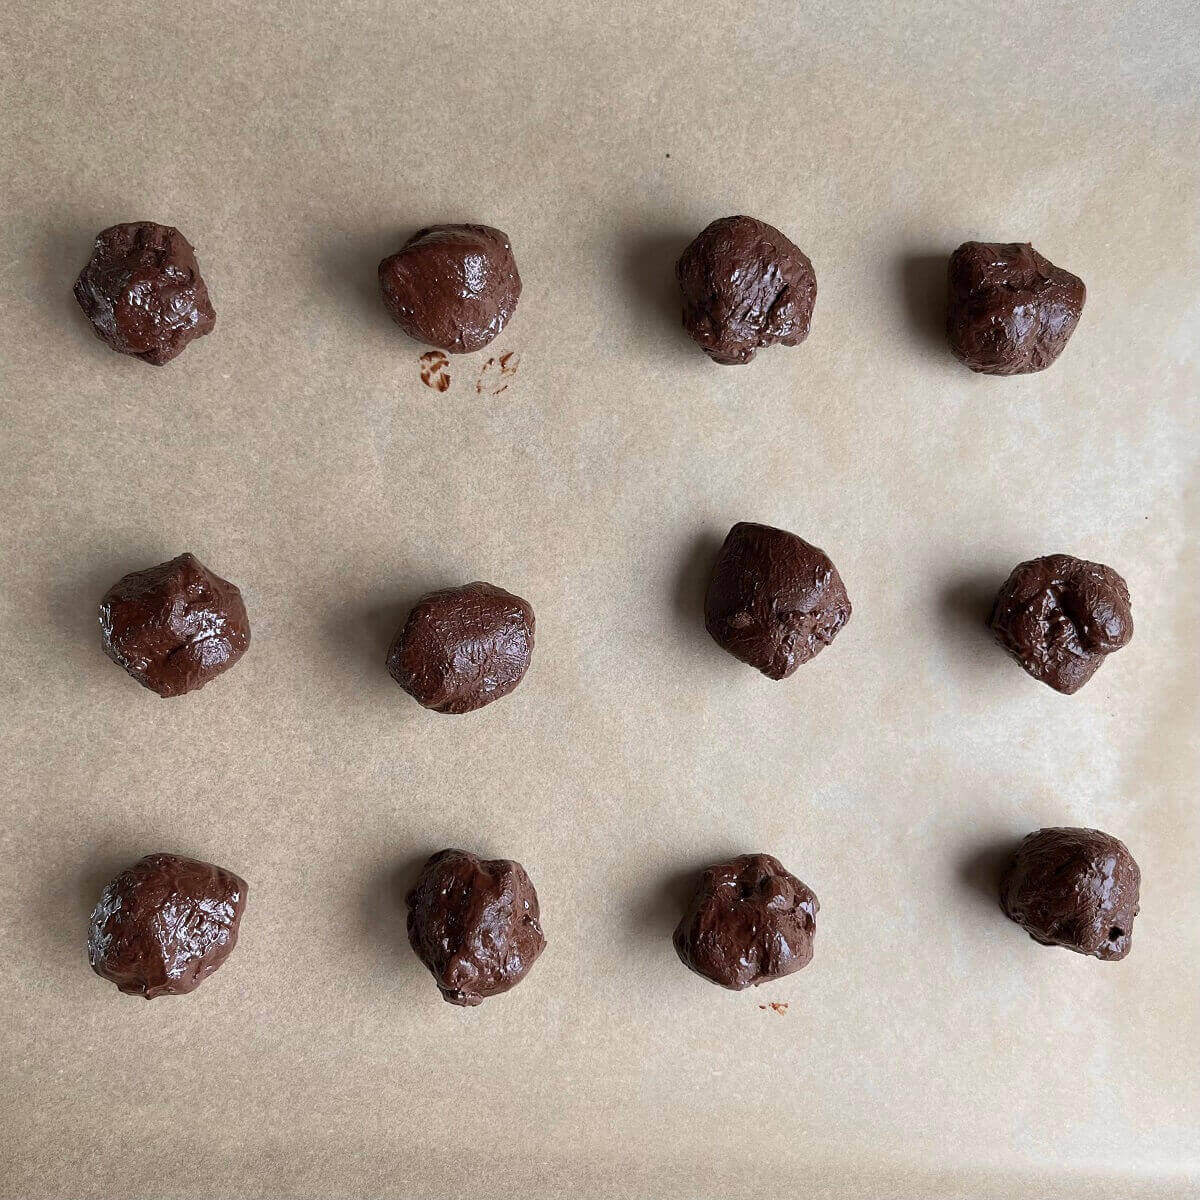 Twelve tahini chocolate balls on a sheet pan lined with parchment paper.